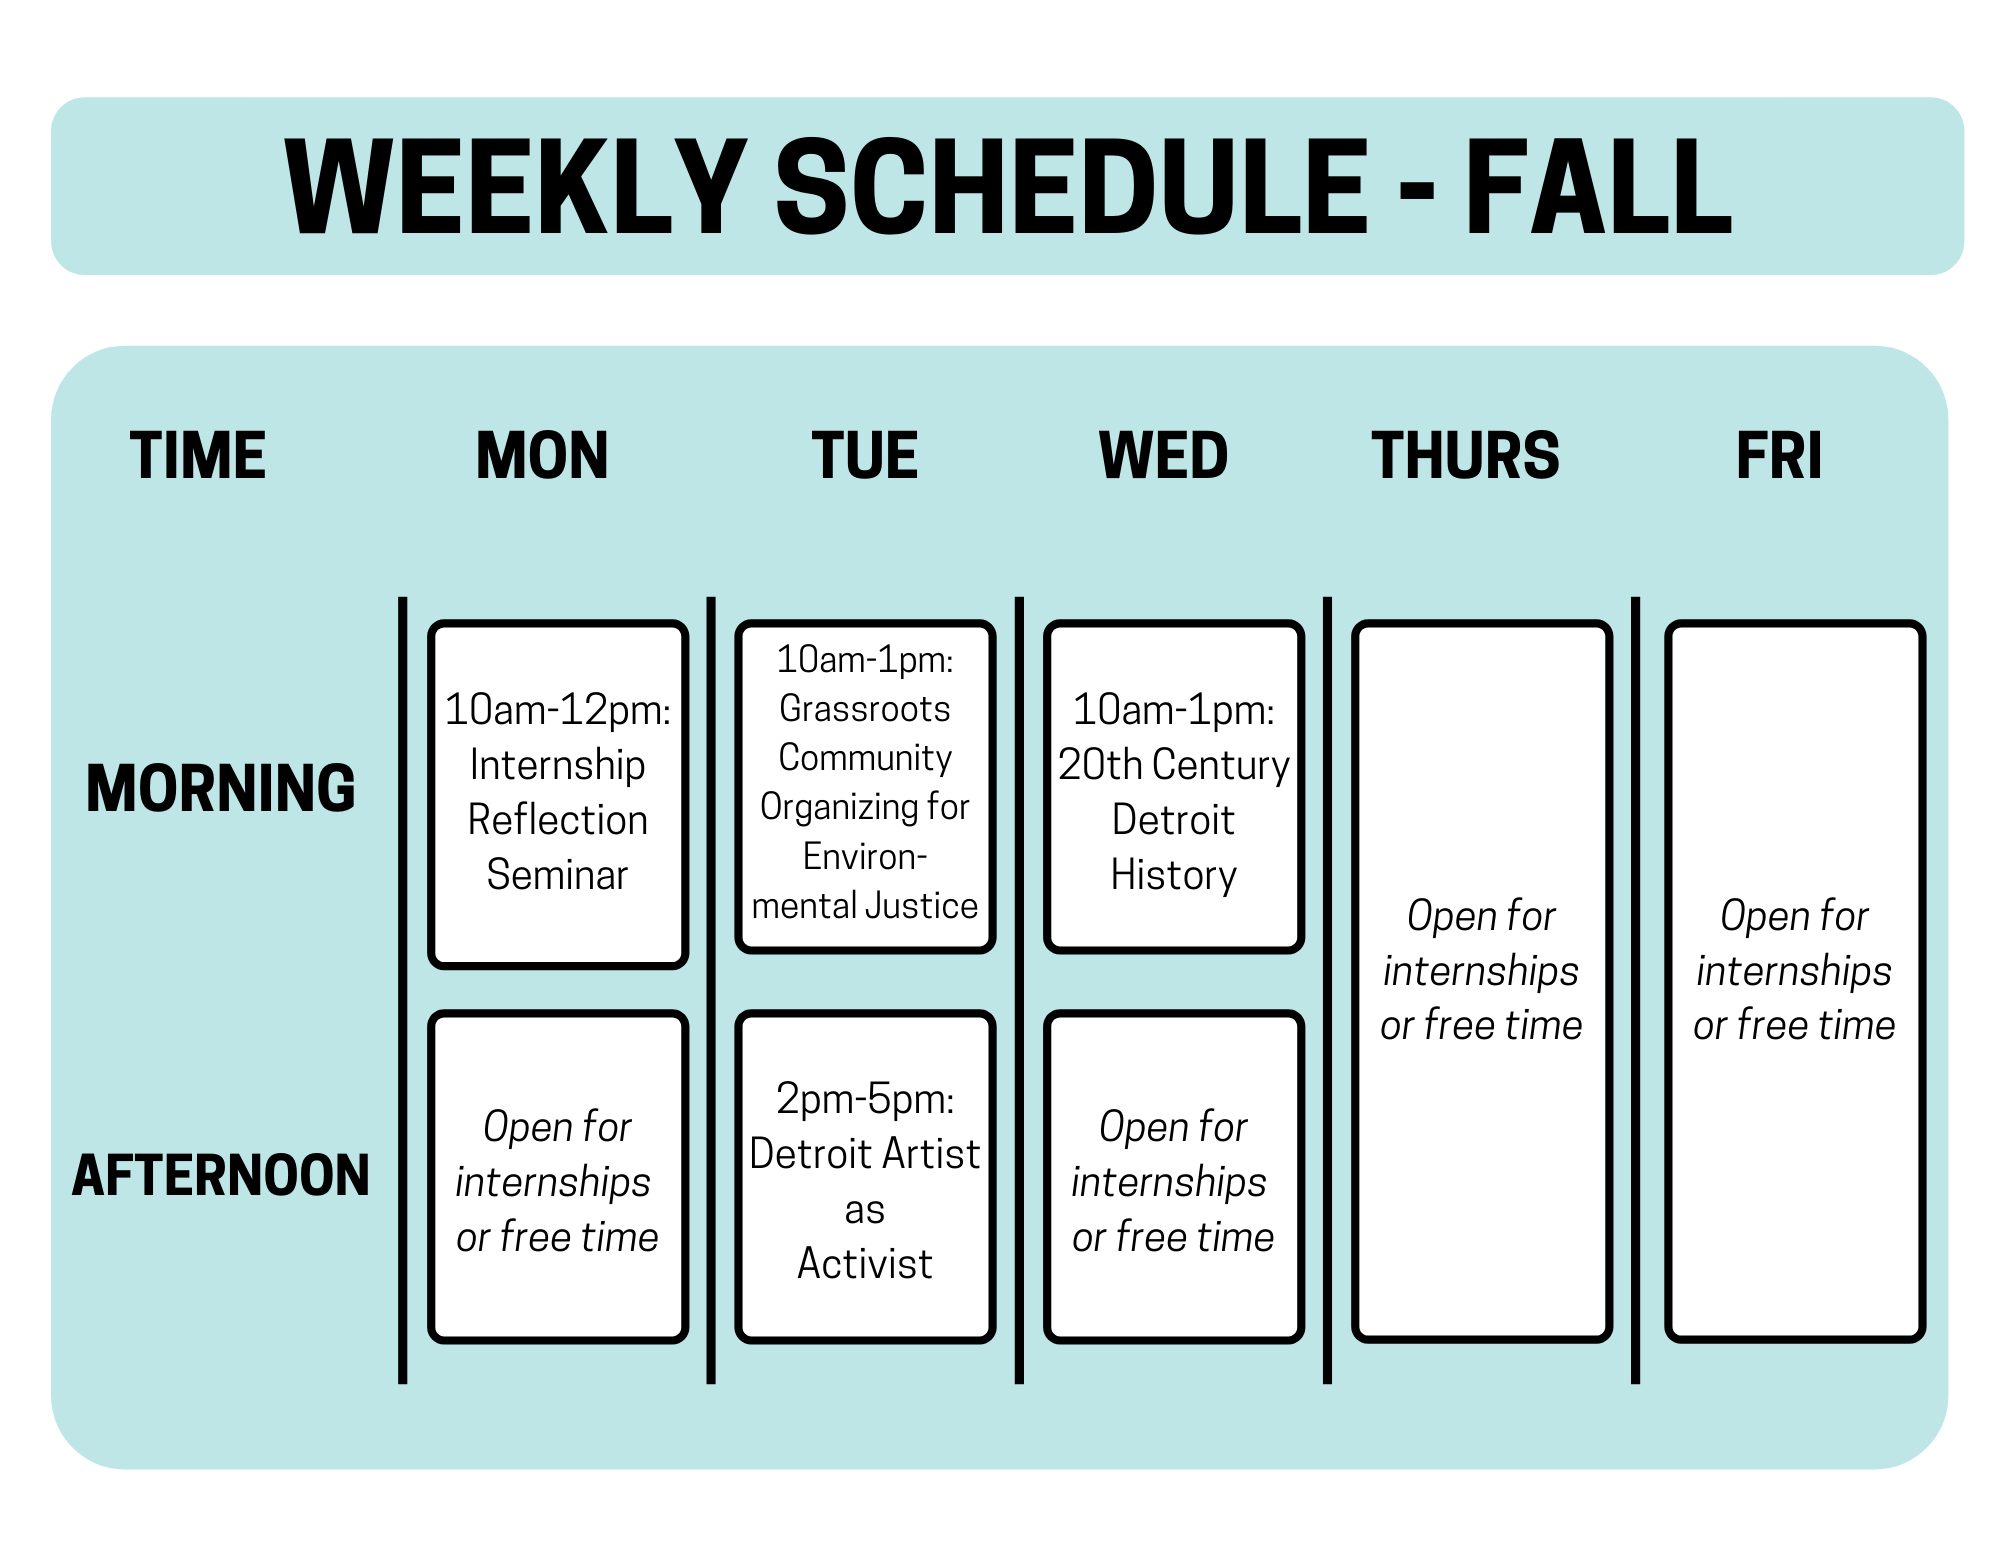 Weekly schedule for fall shows classes on Mondays, Tuesdays, and Wednesdays with time for internships on Monday and Wednesday afternoons, as well as all day Thursday and Friday